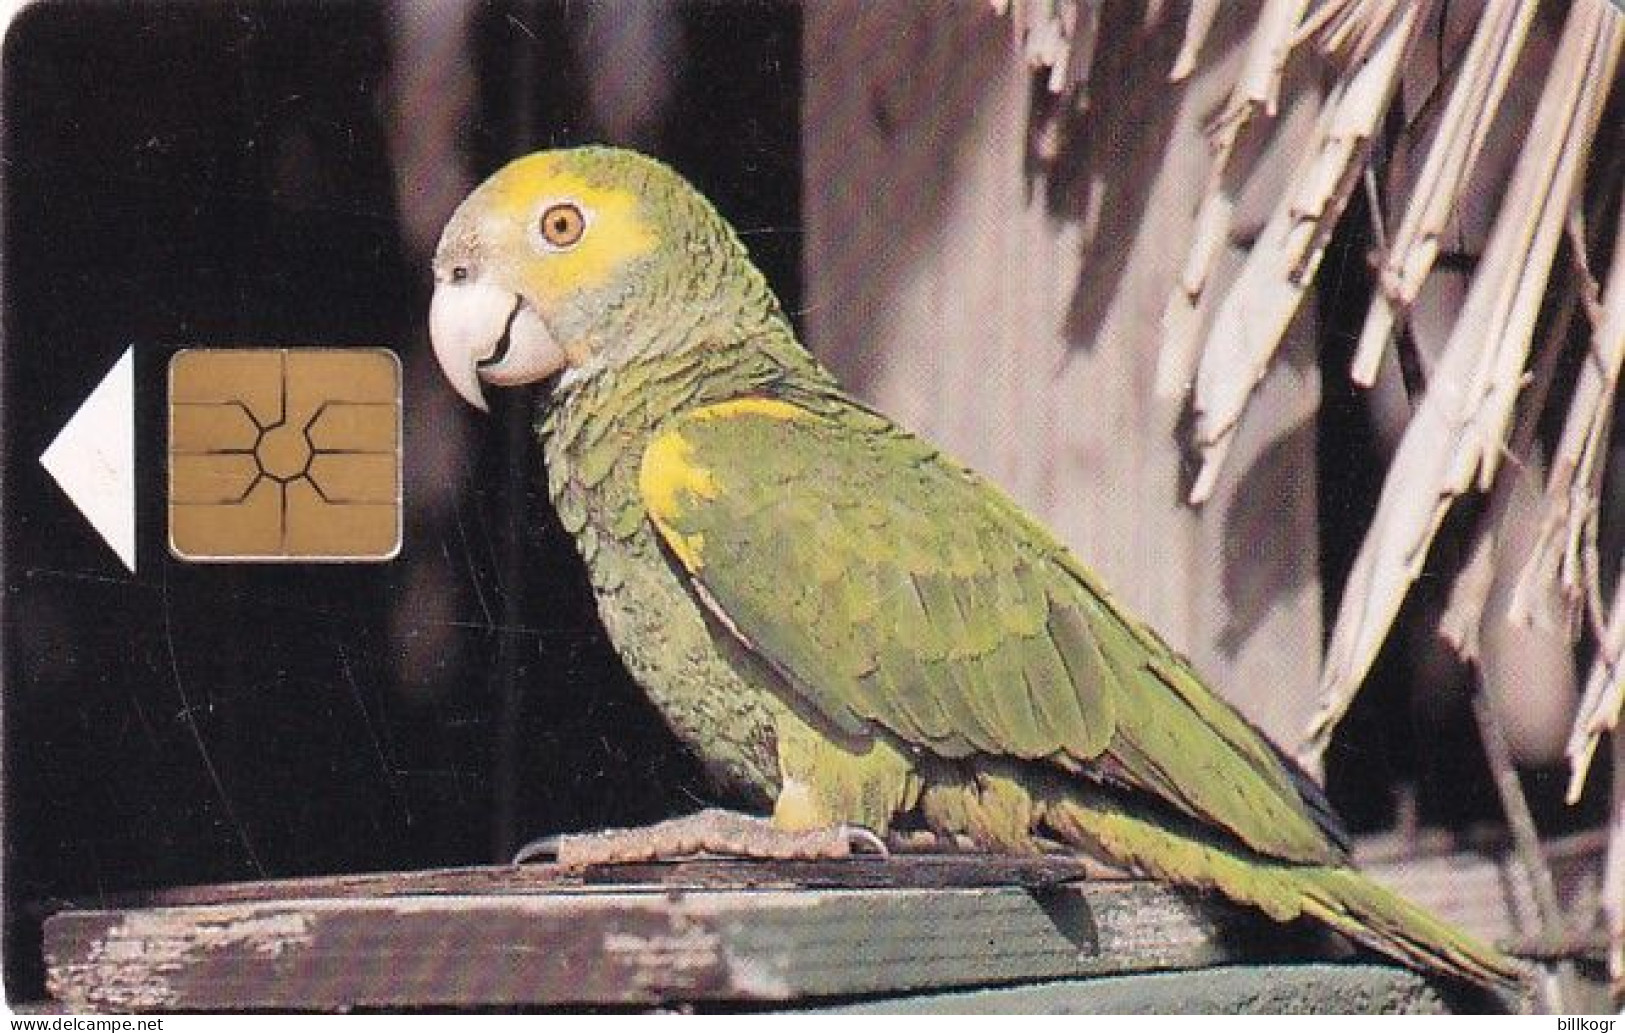 BONAIRE - Yellow-shouldered Parrot, Used - Other - America